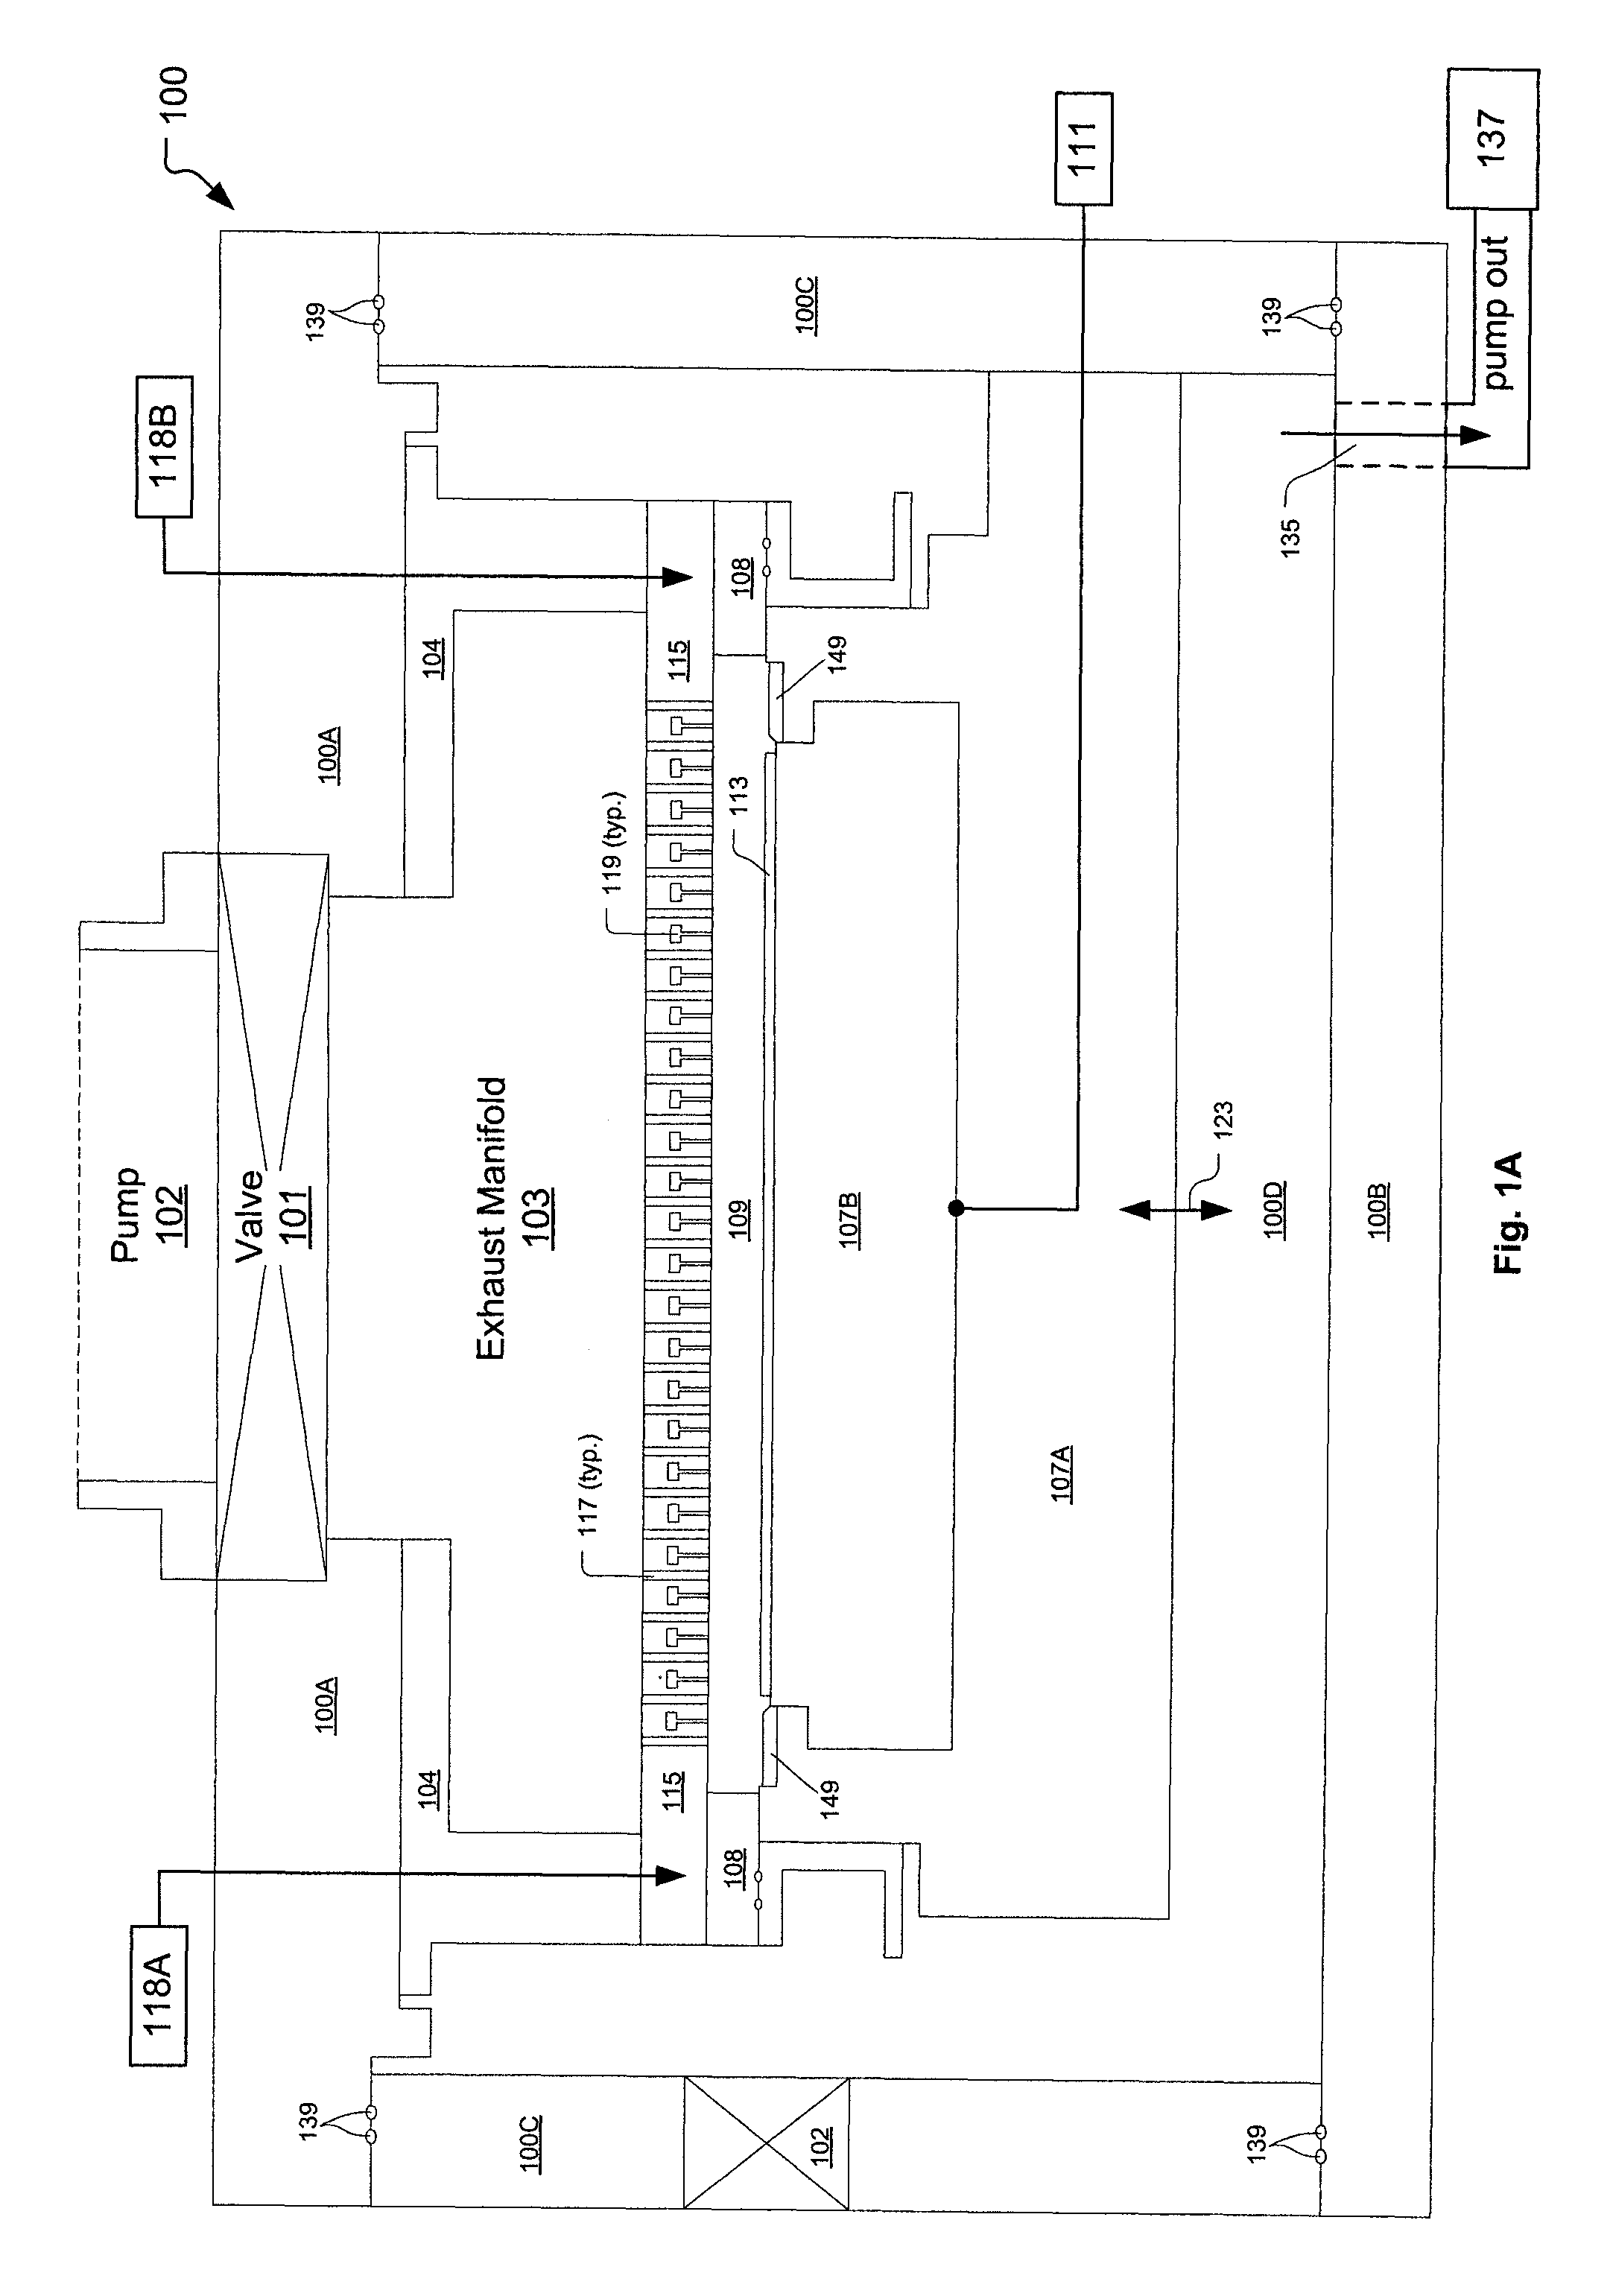 Plasma processing chamber with dual axial gas injection and exhaust